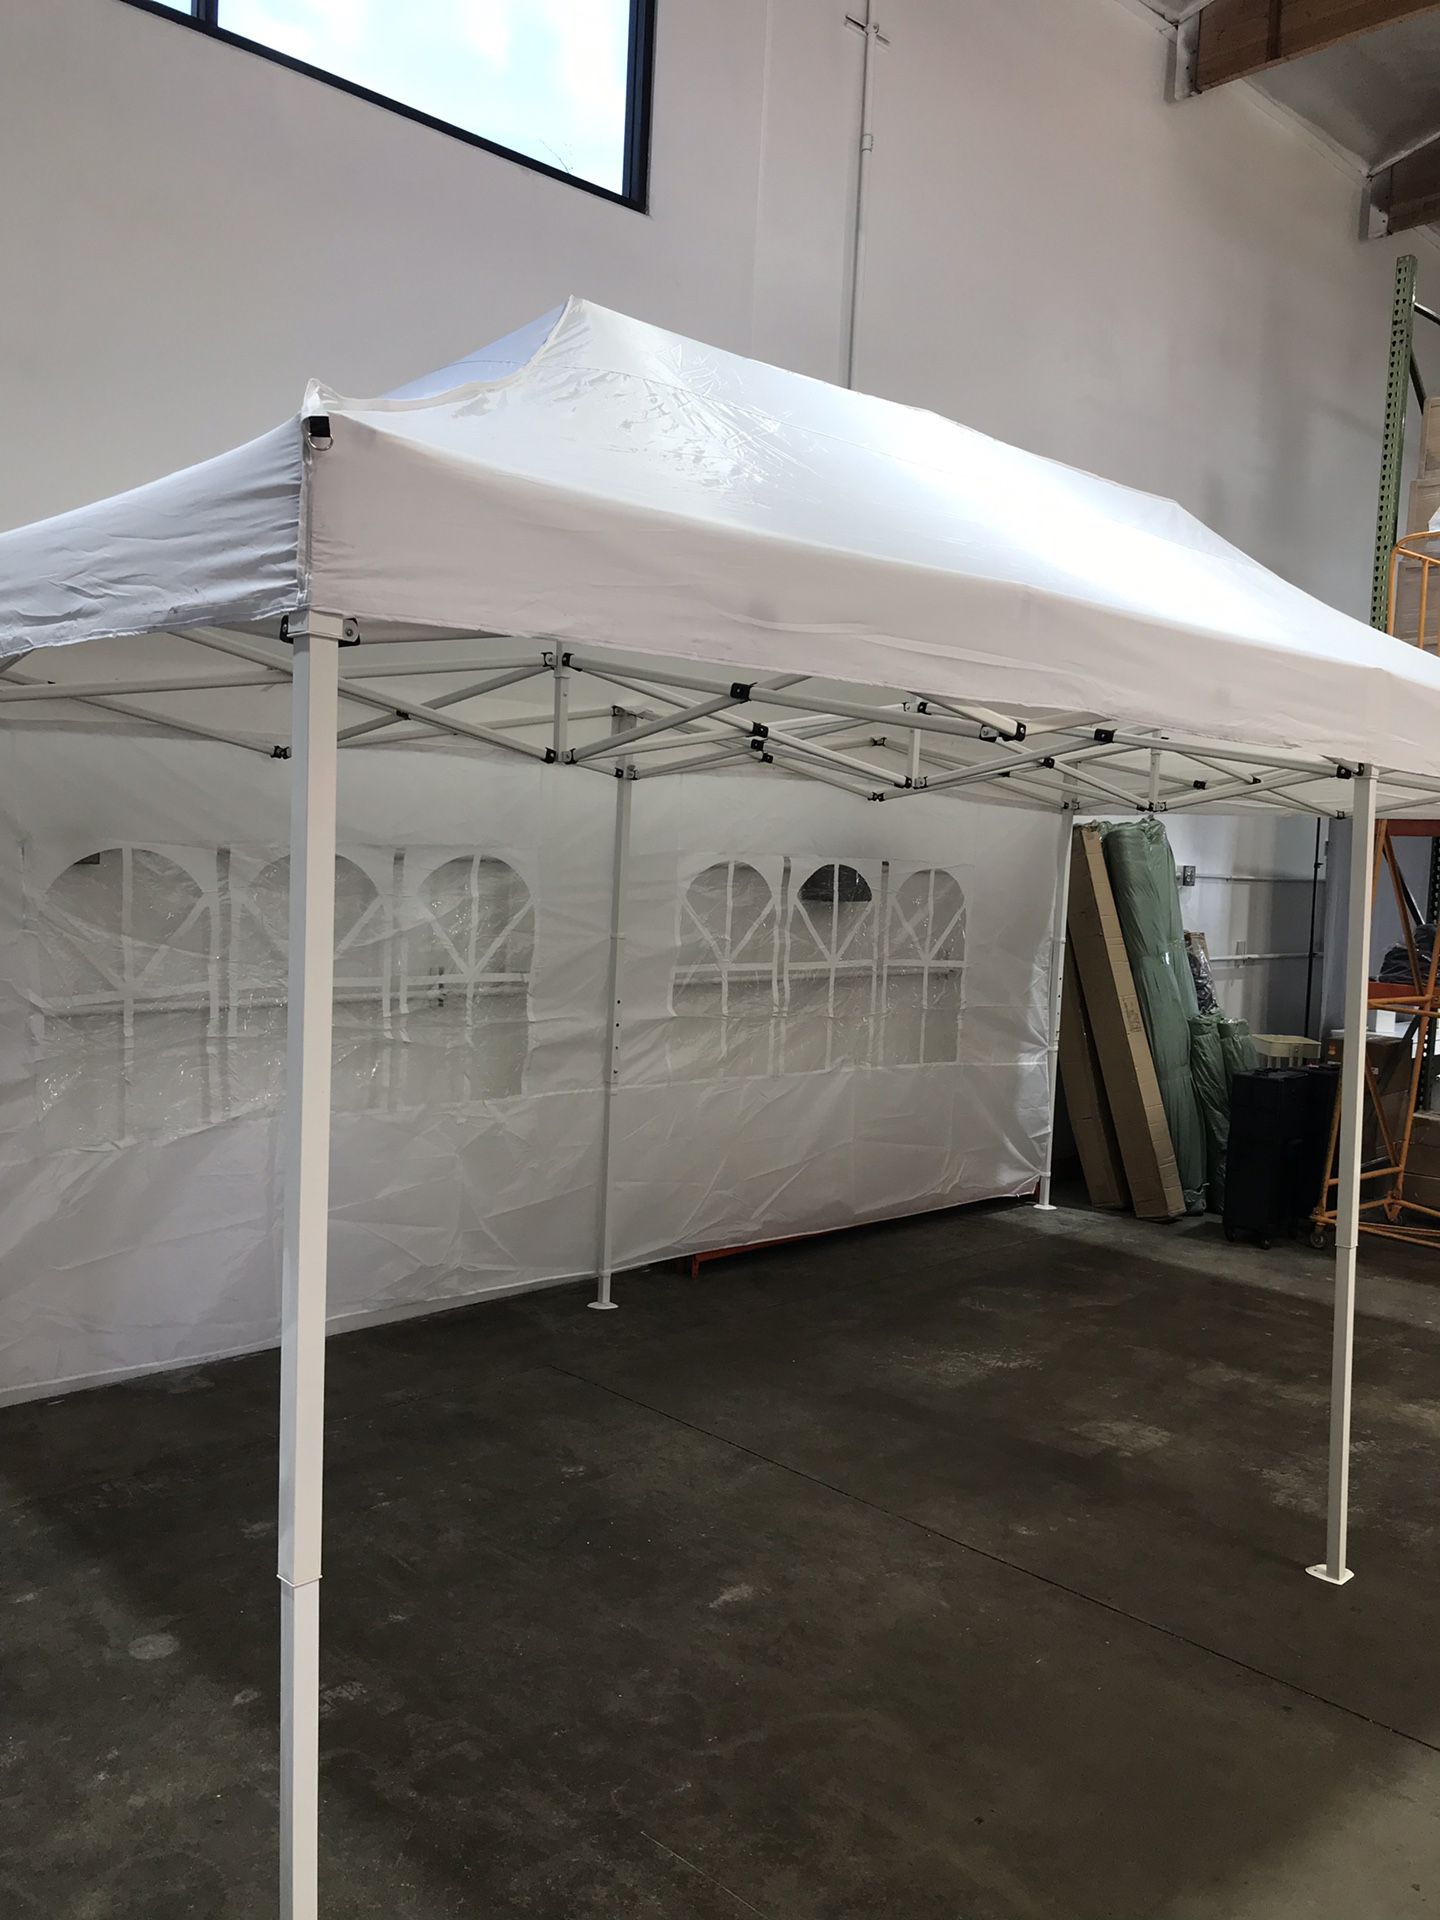 🎉🎉🎉10x20ft Pop Up Canopy Tent with side walls available in BLACK-WHITE-BLUE 🎉🎉🎉